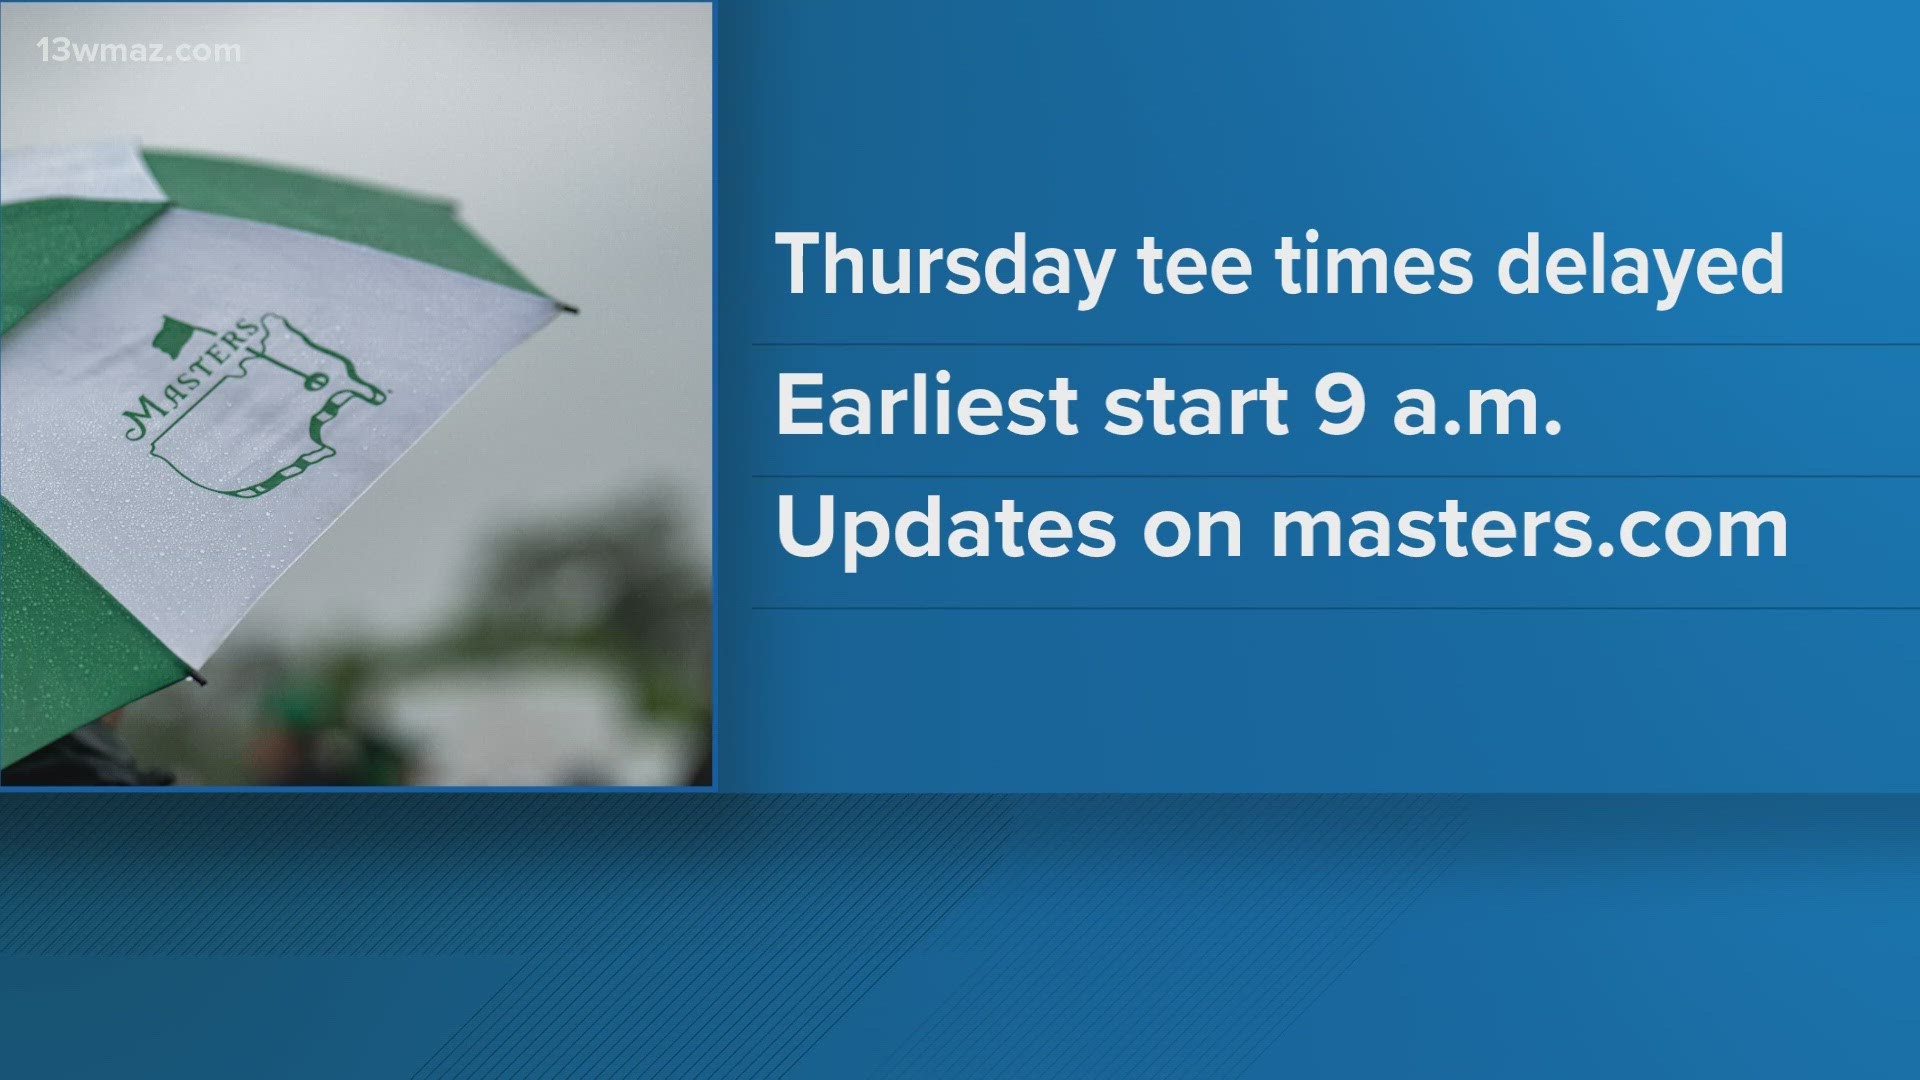 Augusta National Golf Club said the earliest the tournament would begin is 9 a.m.